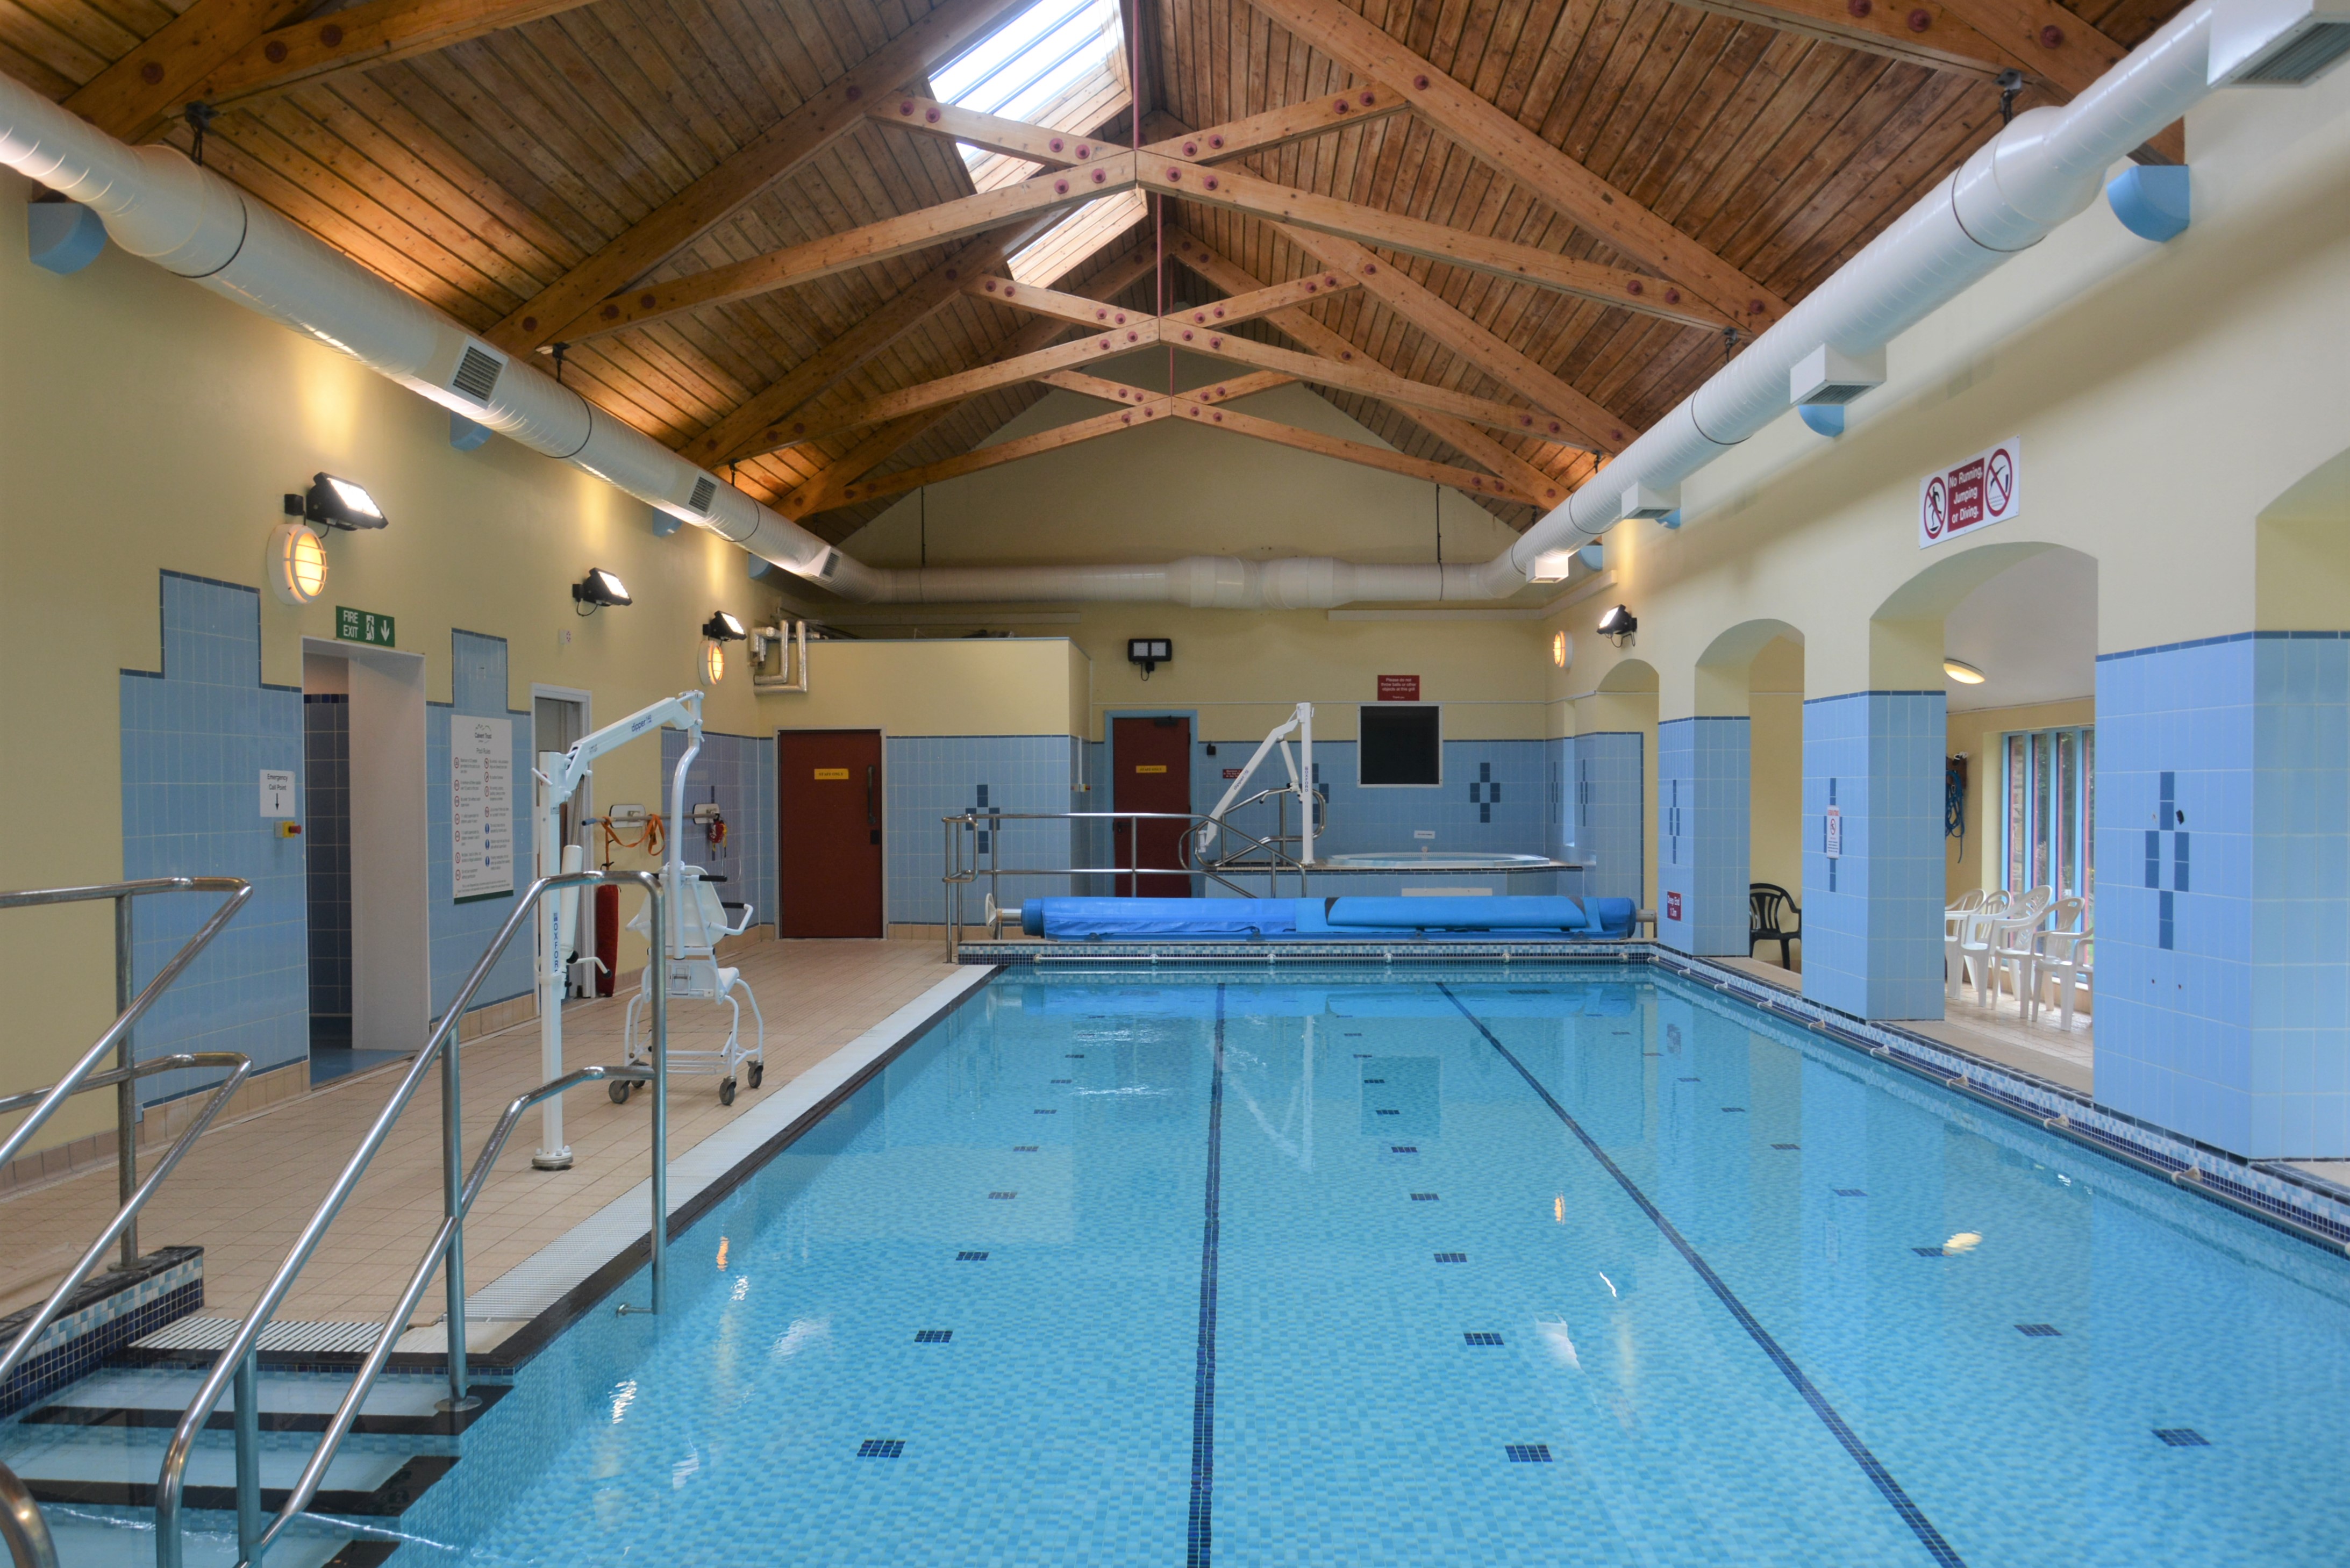 An accessible swimming pool